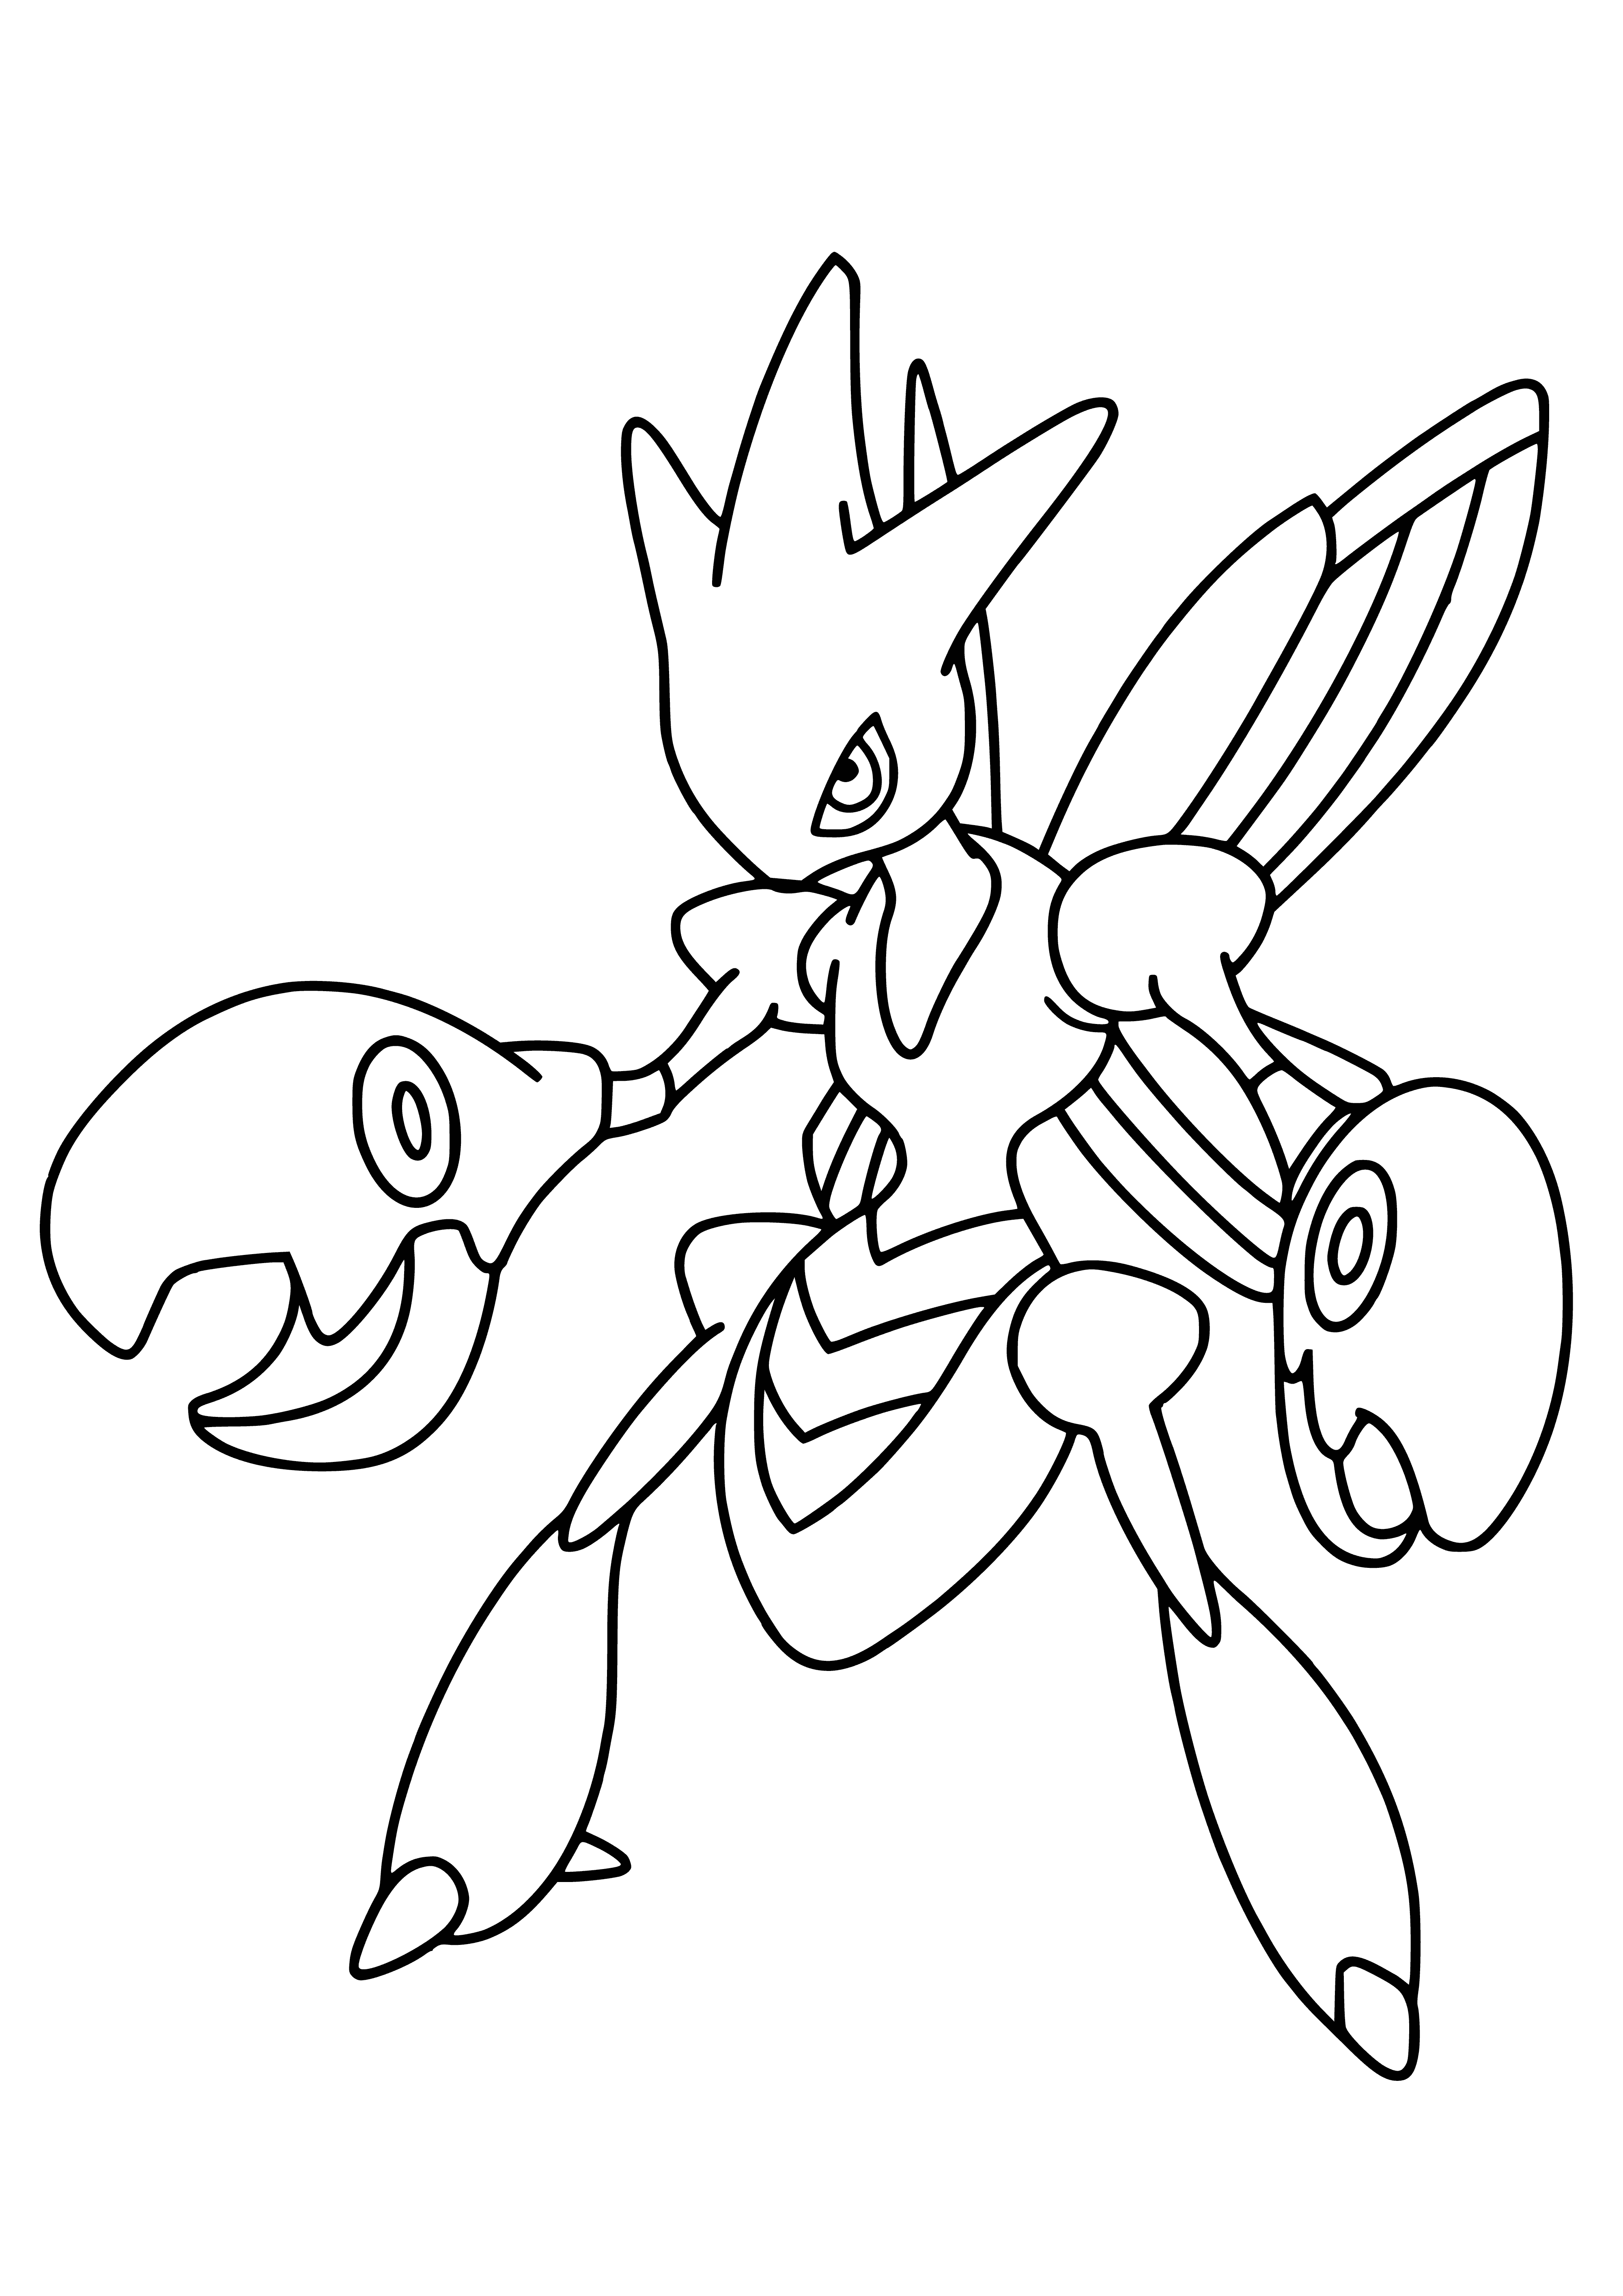 coloring page: A menacing, red-appendaged Pokemon with beige body, brown stripes, yellow eyes and black pupils. #Pokemon #Legendary